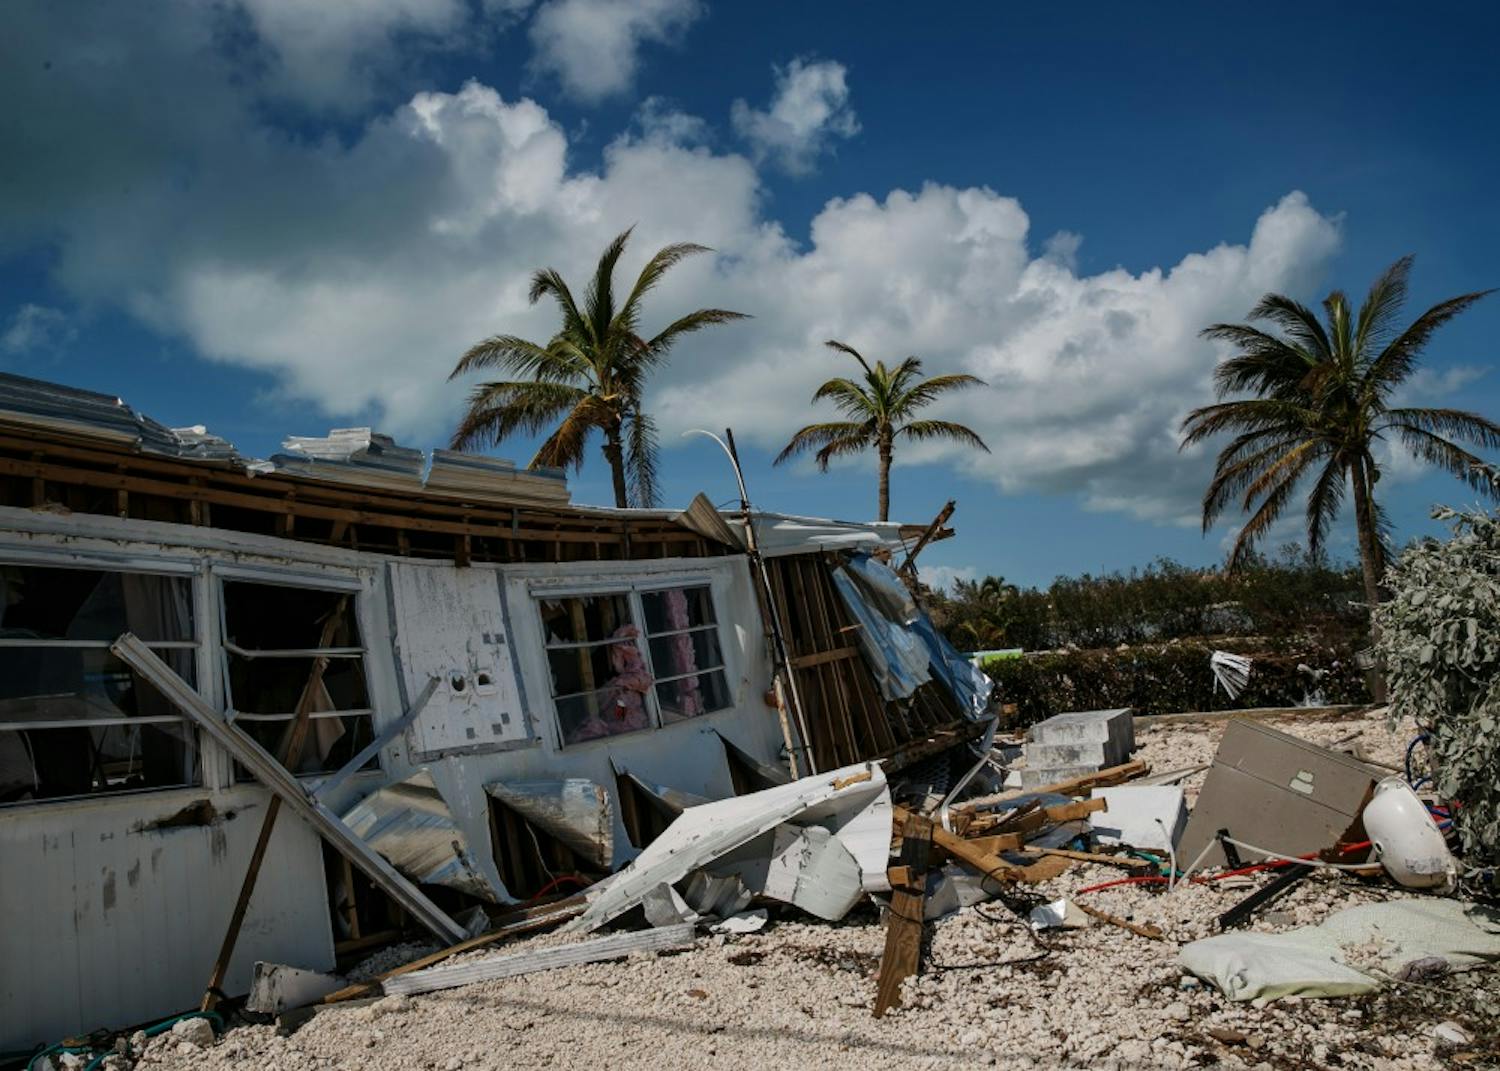 Trailer homes at the Sea Breeze trailer park are destroyed in the wake of Hurricane Irma, in Islamorada, Fla., on Tuesday, Sept. 12, 2017.&nbsp;